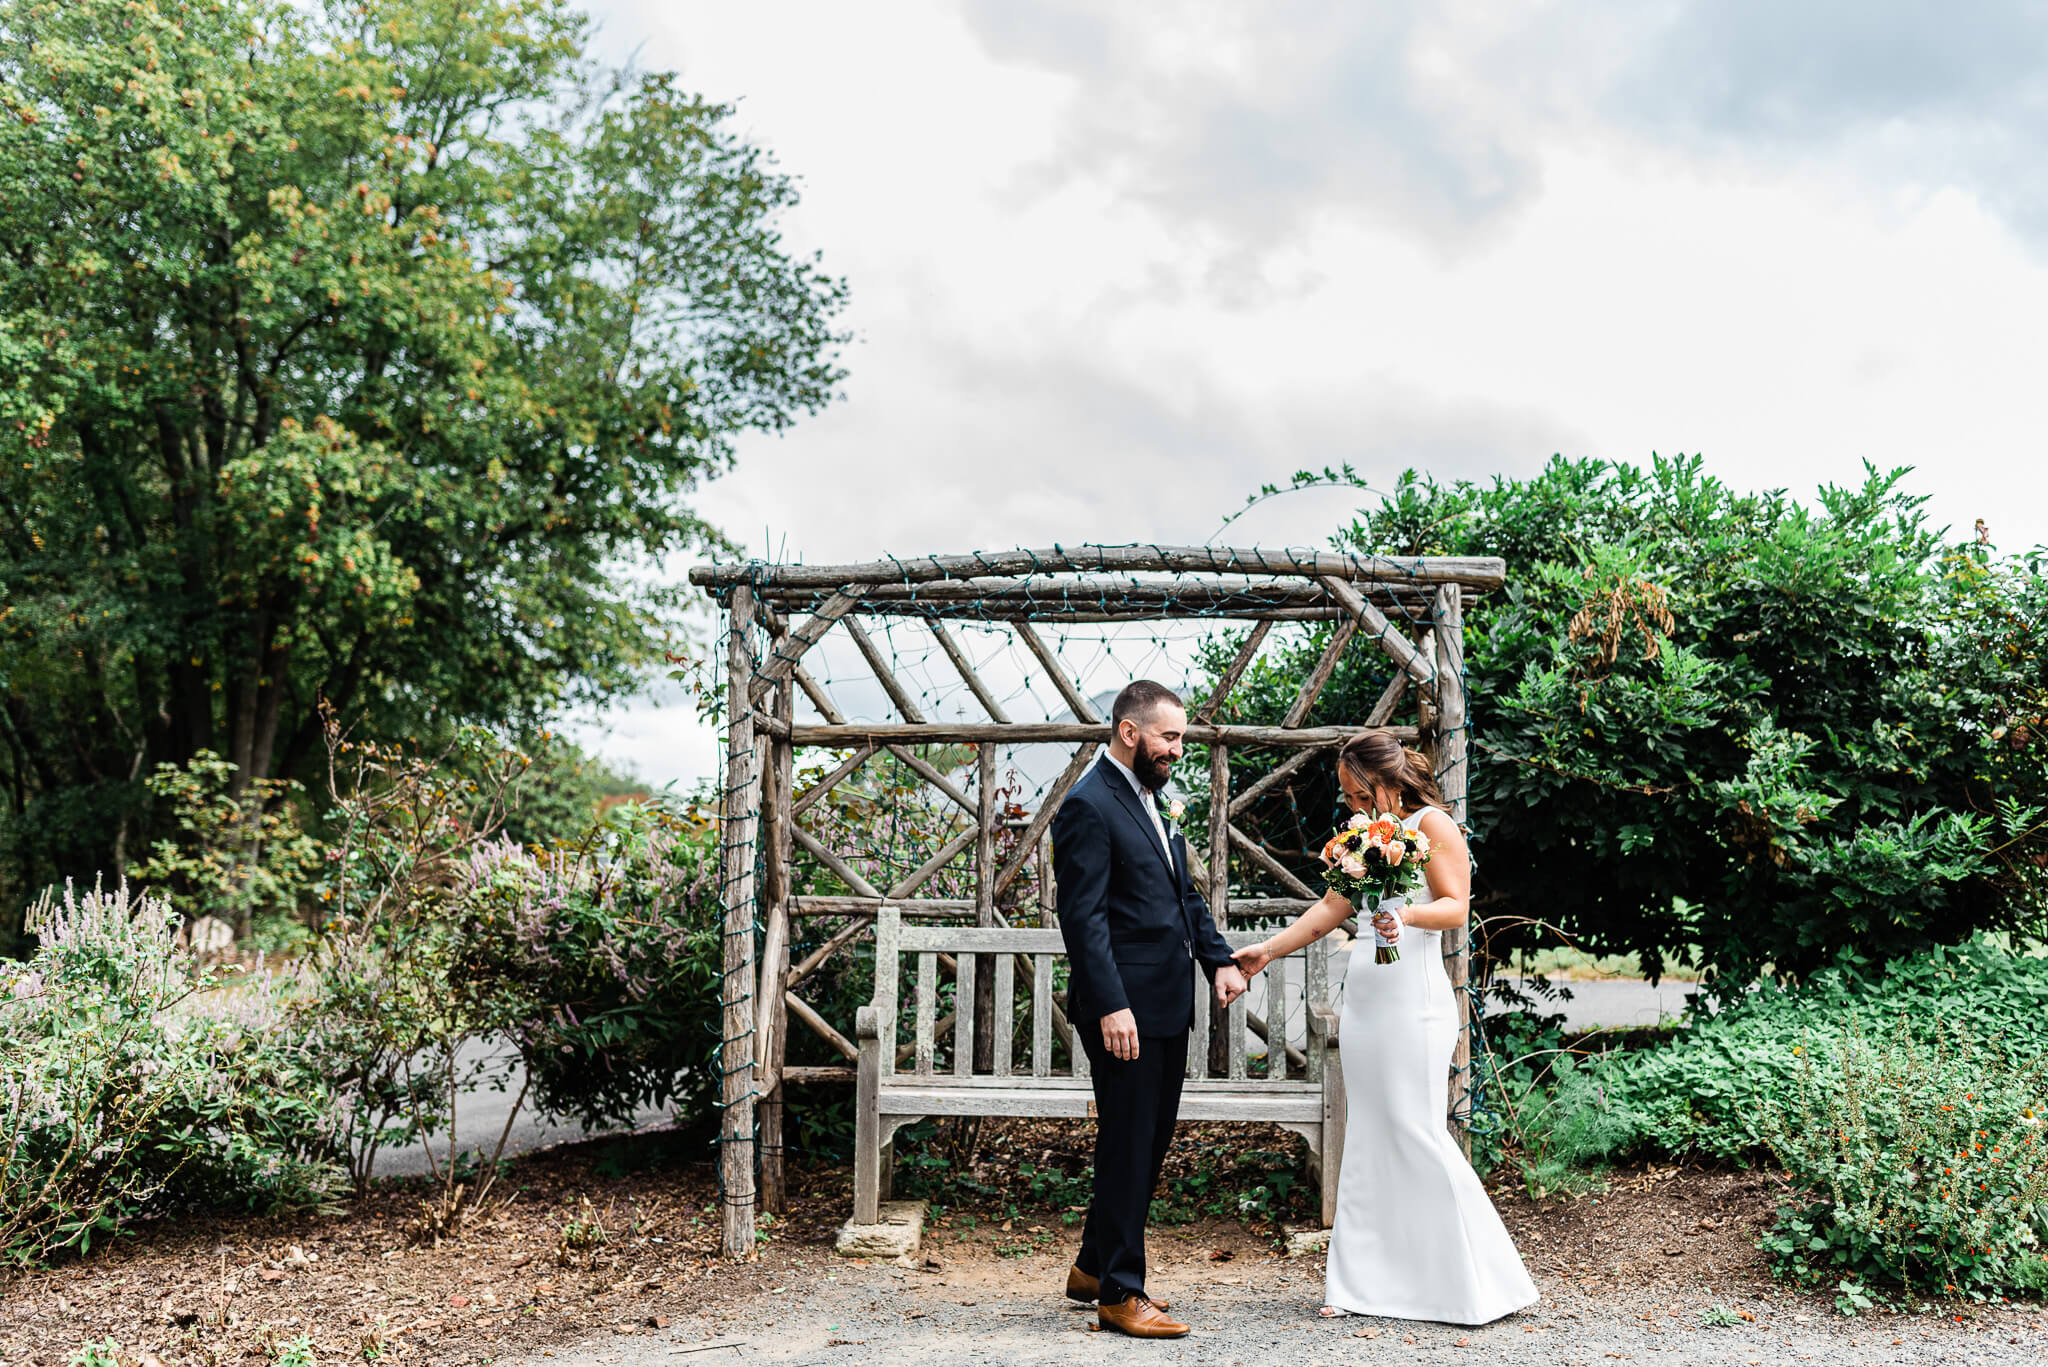 A groom in a black suit helps his bride walk through a garden holding her colorful bouquet by a wooden bench and pergola